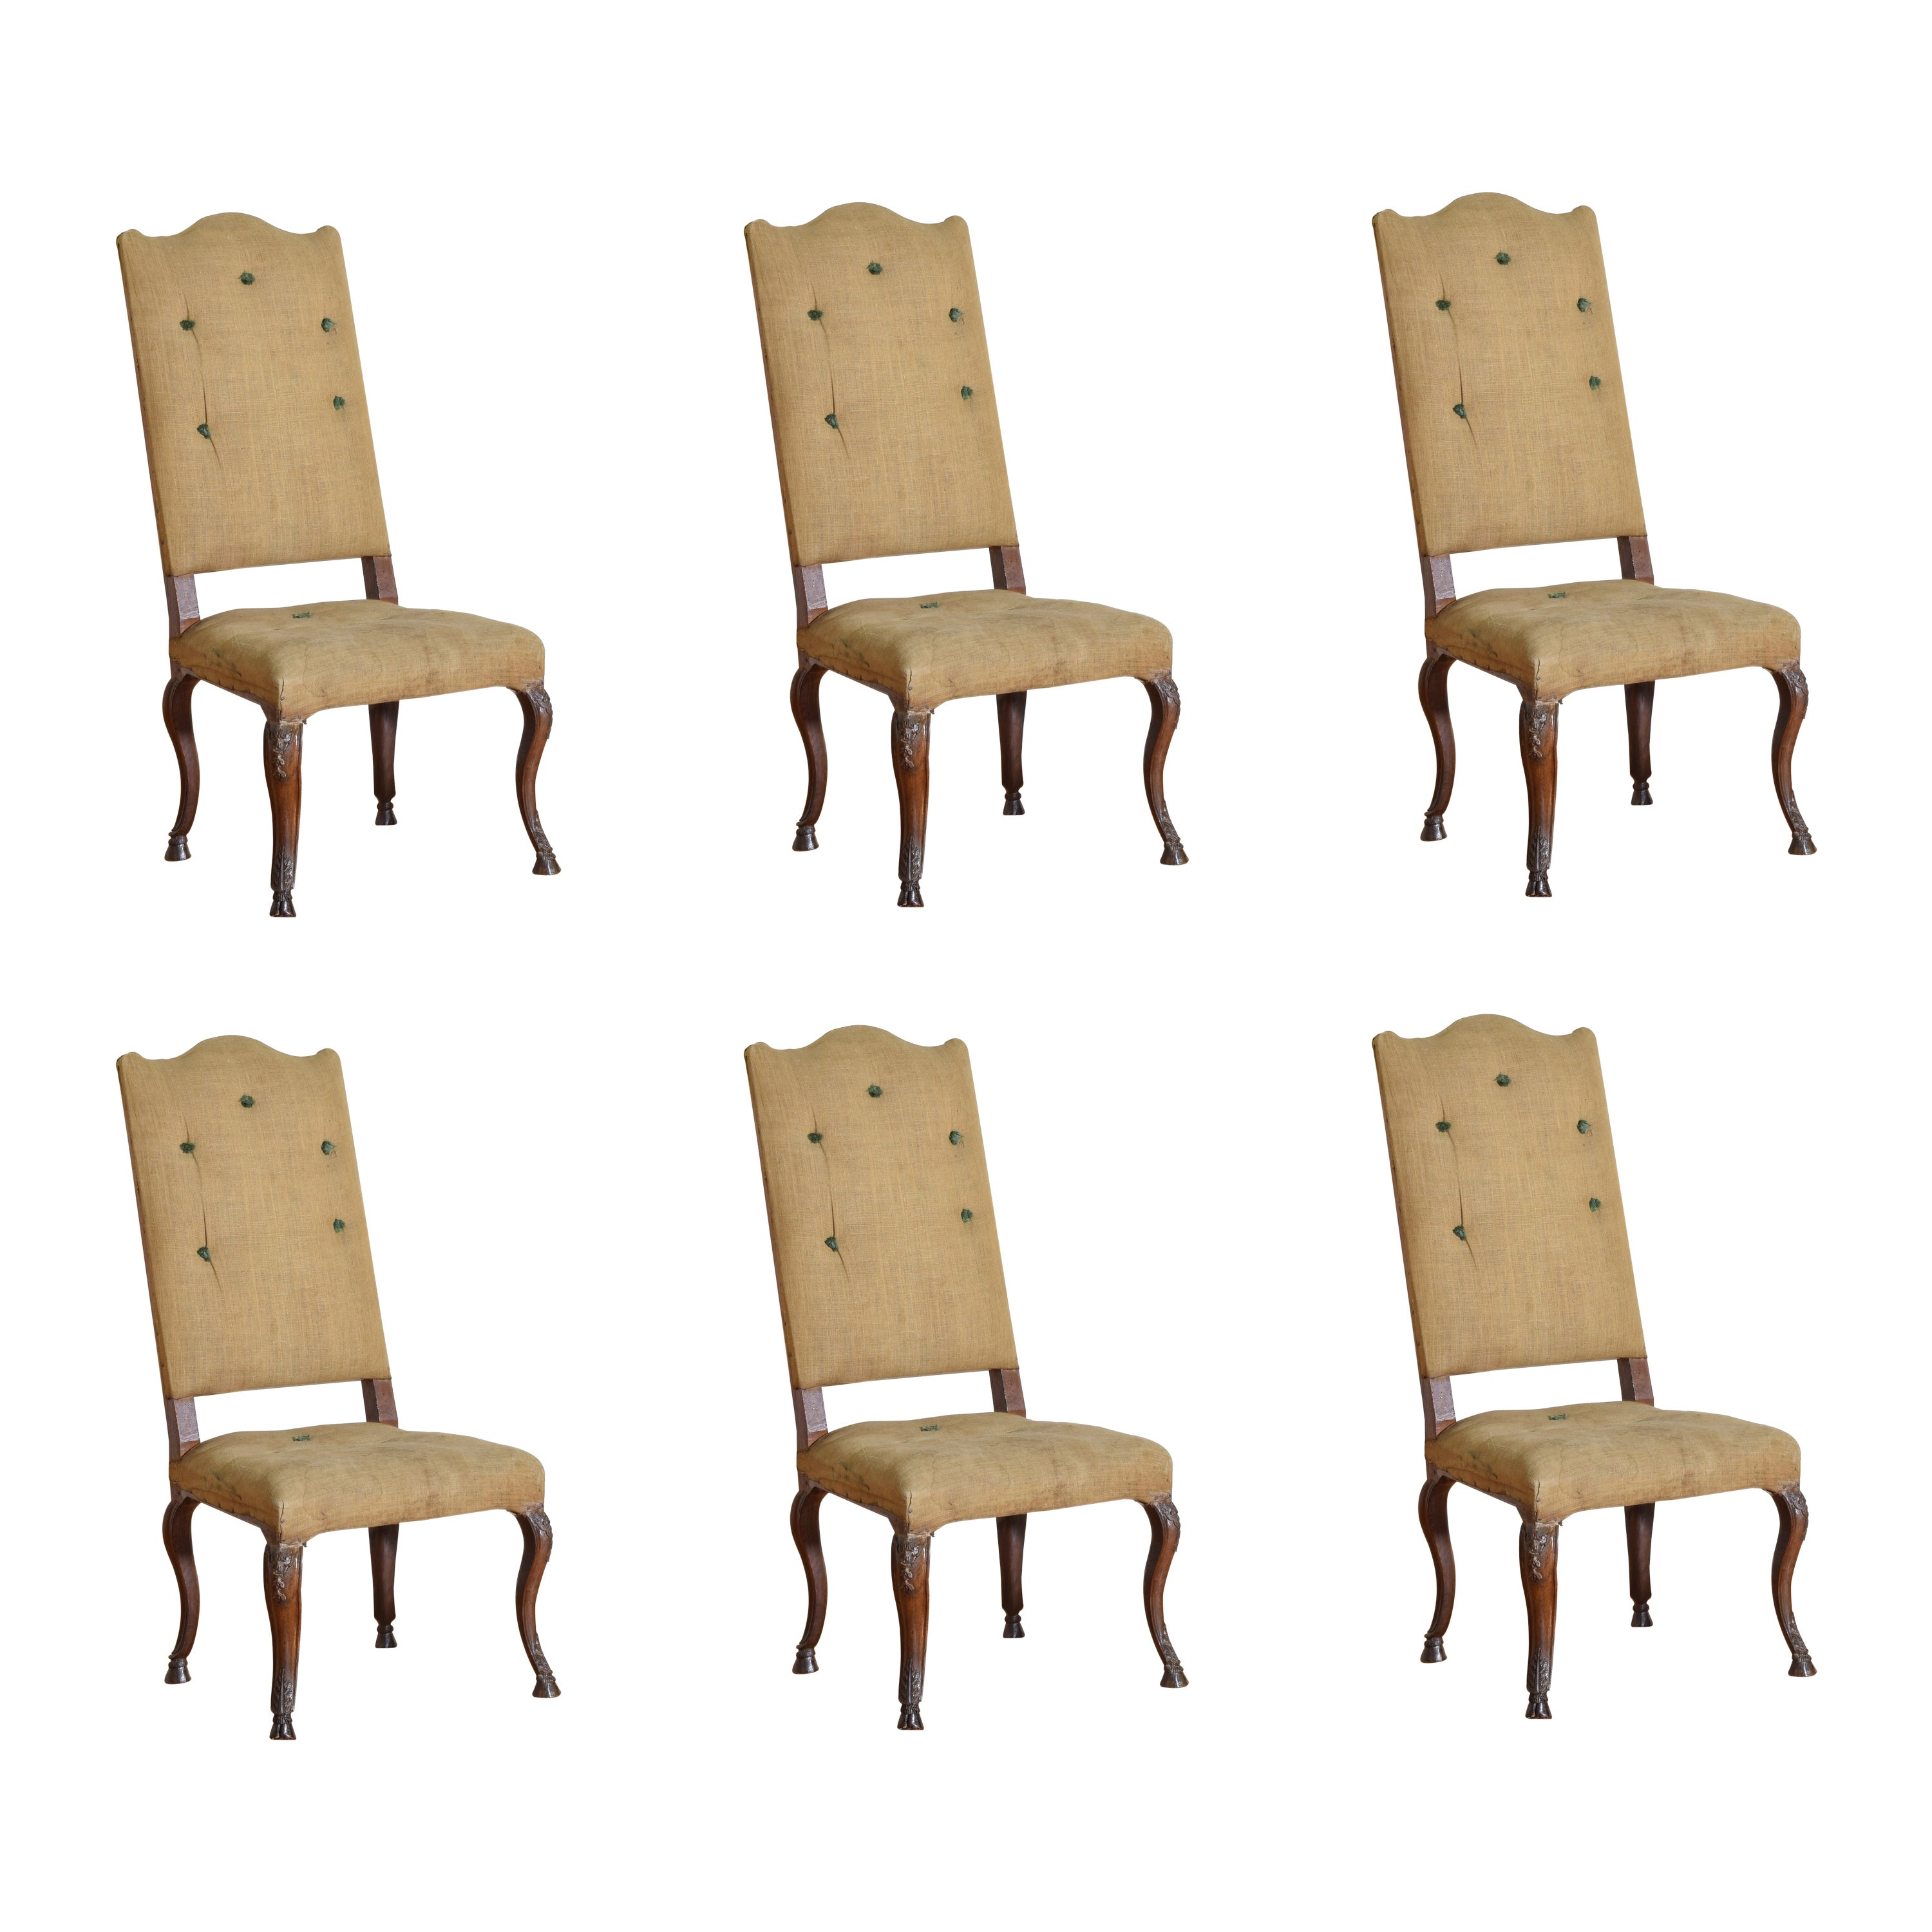 Set of 6 Italian, Piemontese, Rococo Period Carved Walnut Dining Chairs, 18thc